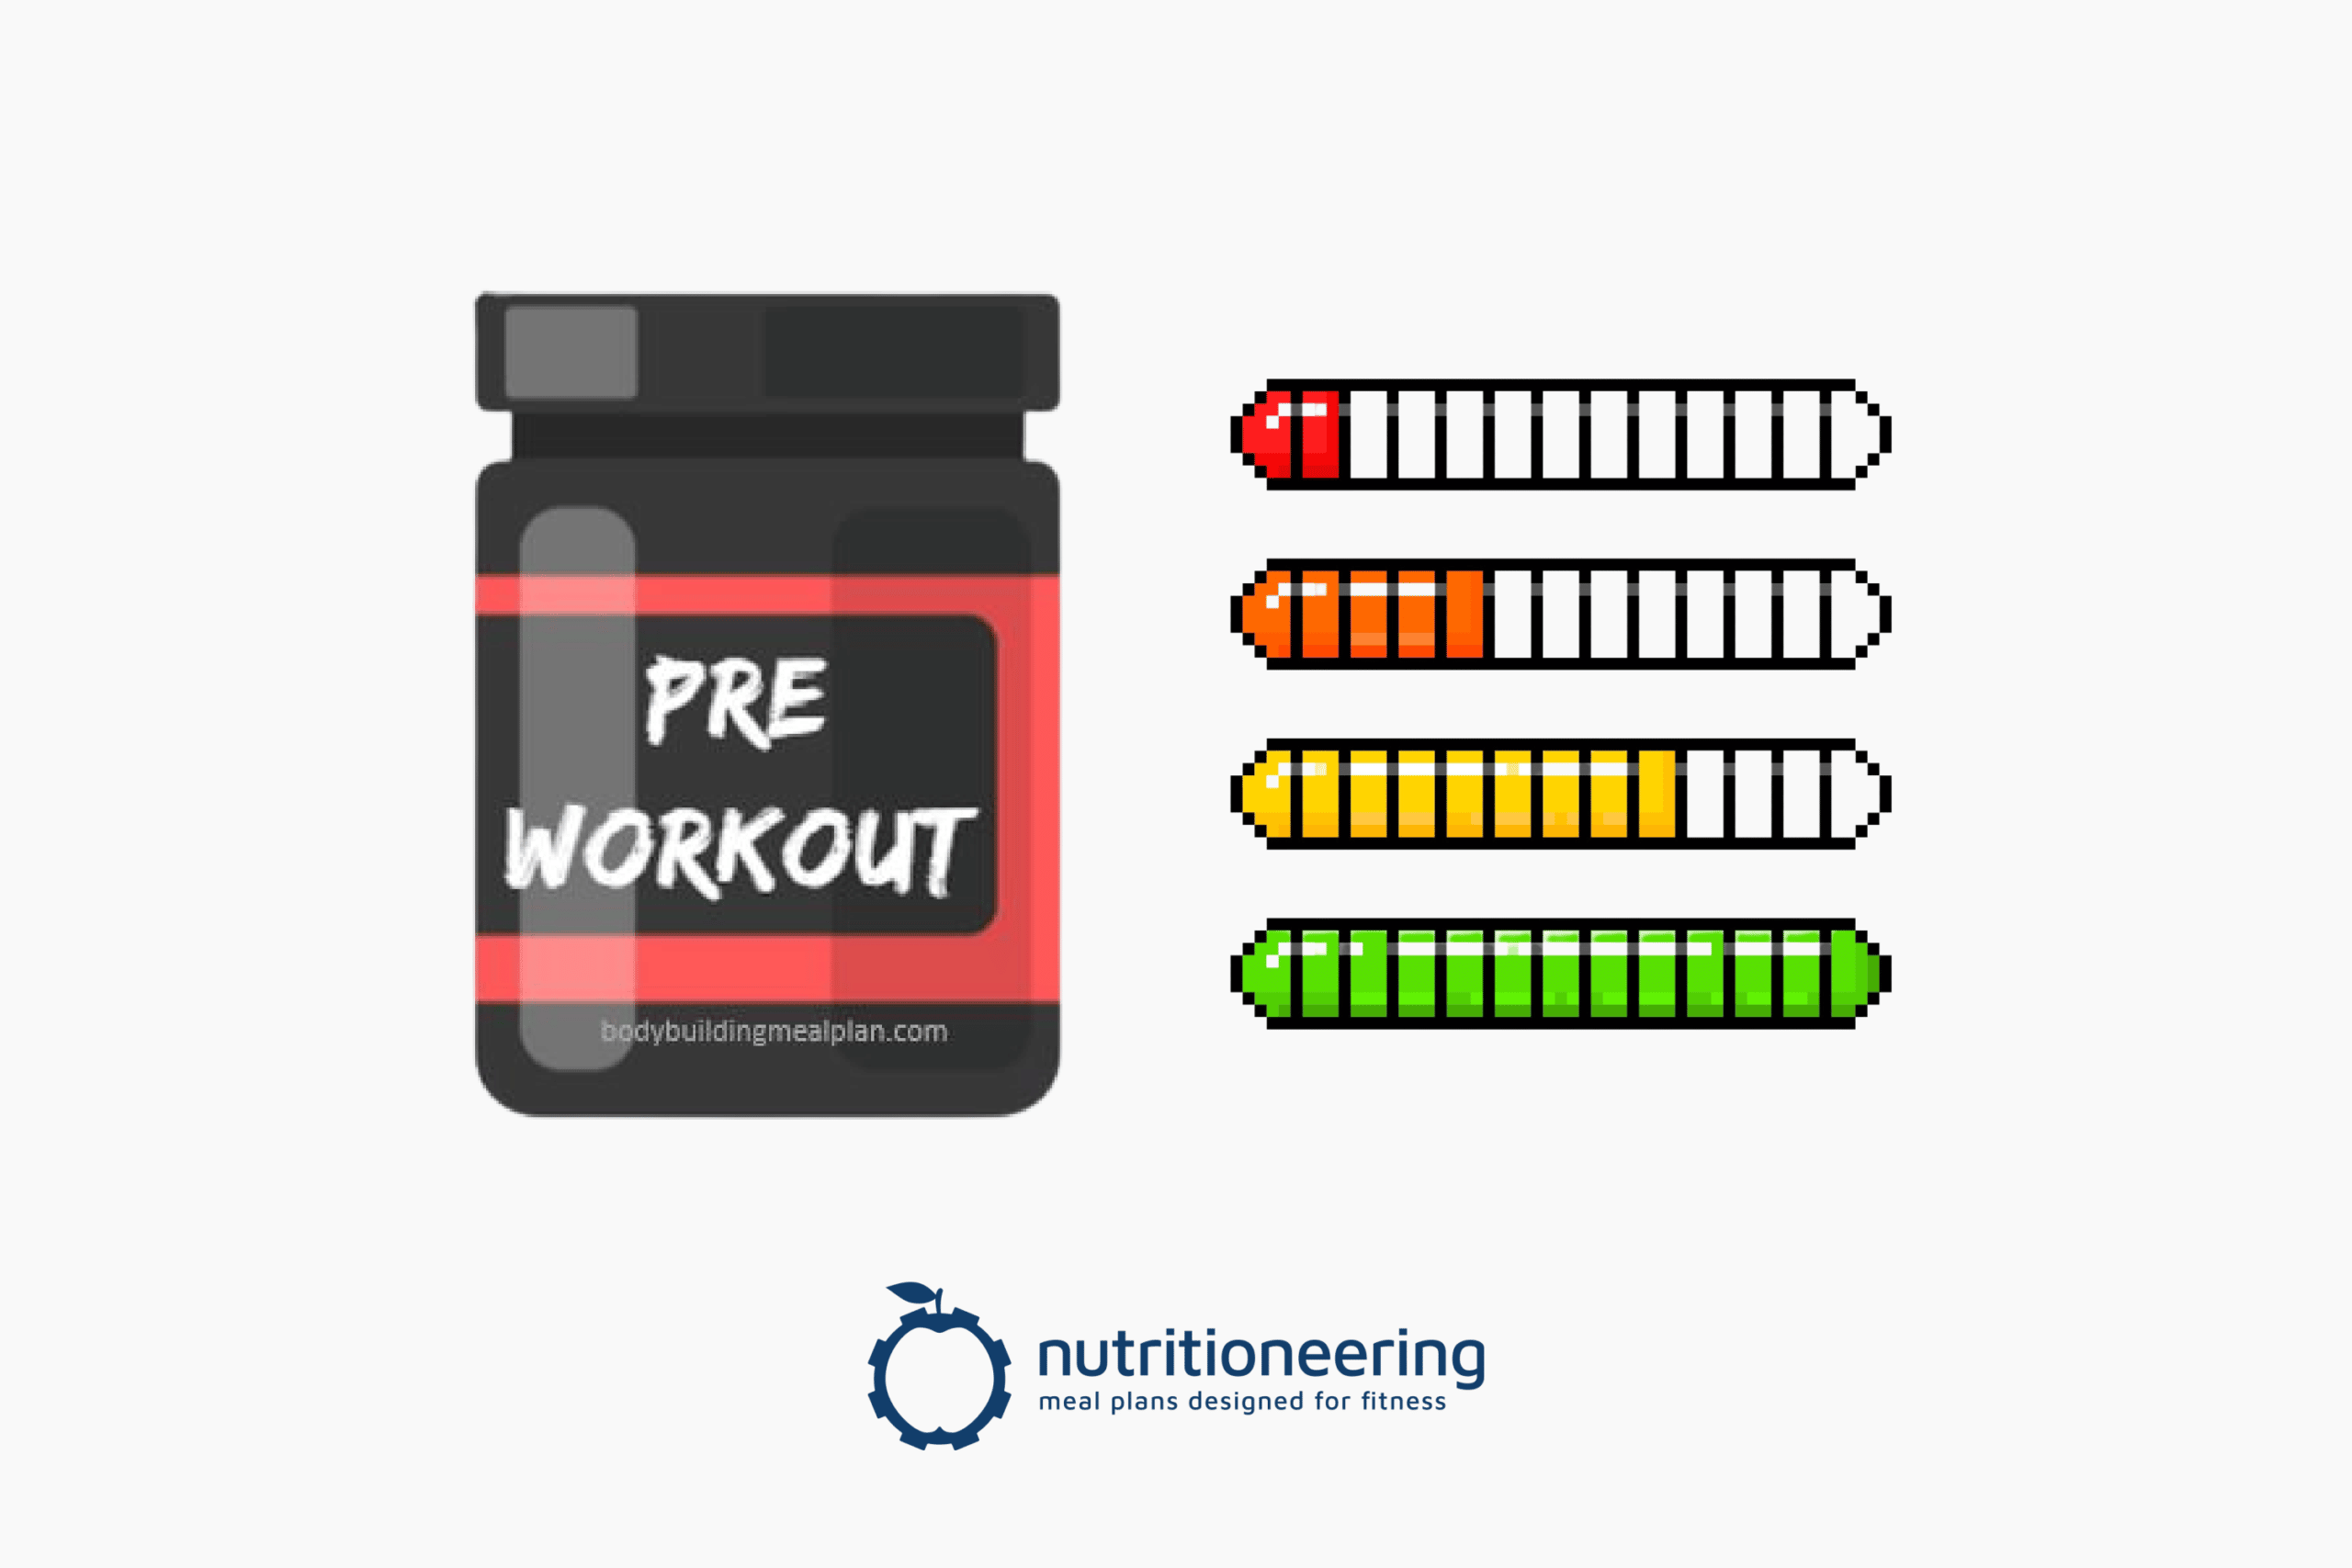 Salt in Pre Workout Timing